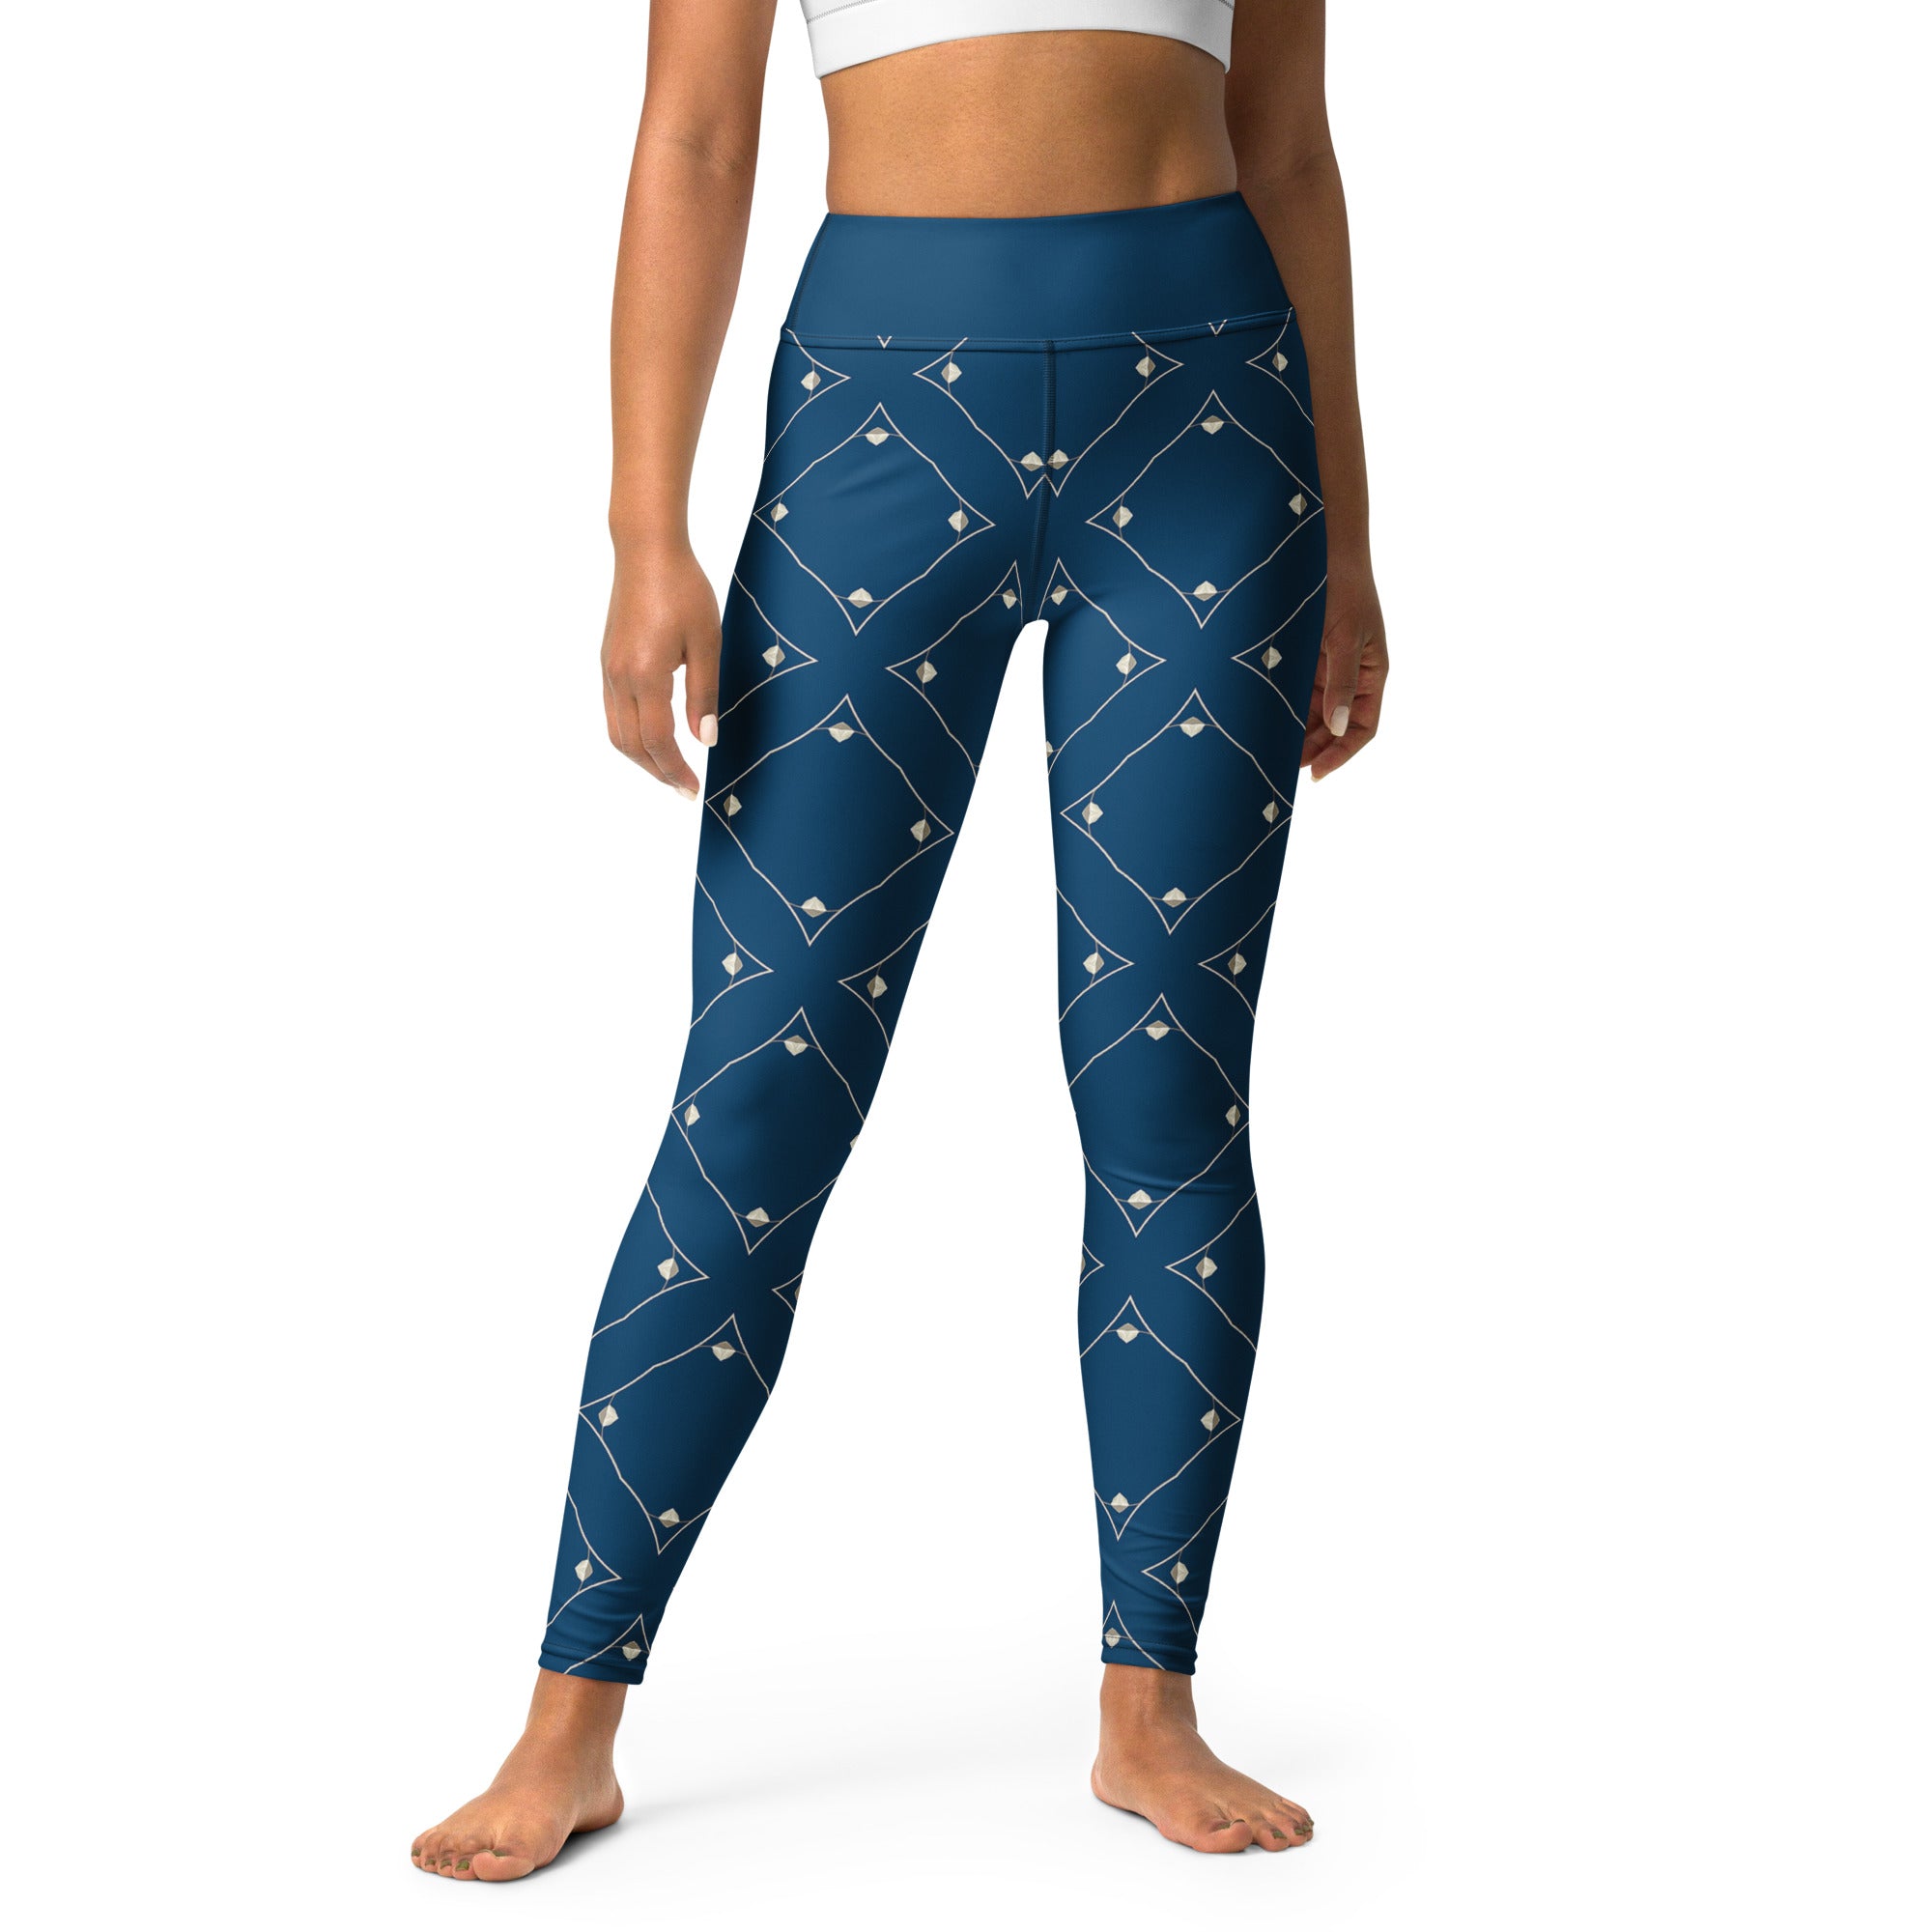 Mystic Mirage Yoga Leggings with colorful pattern on display.